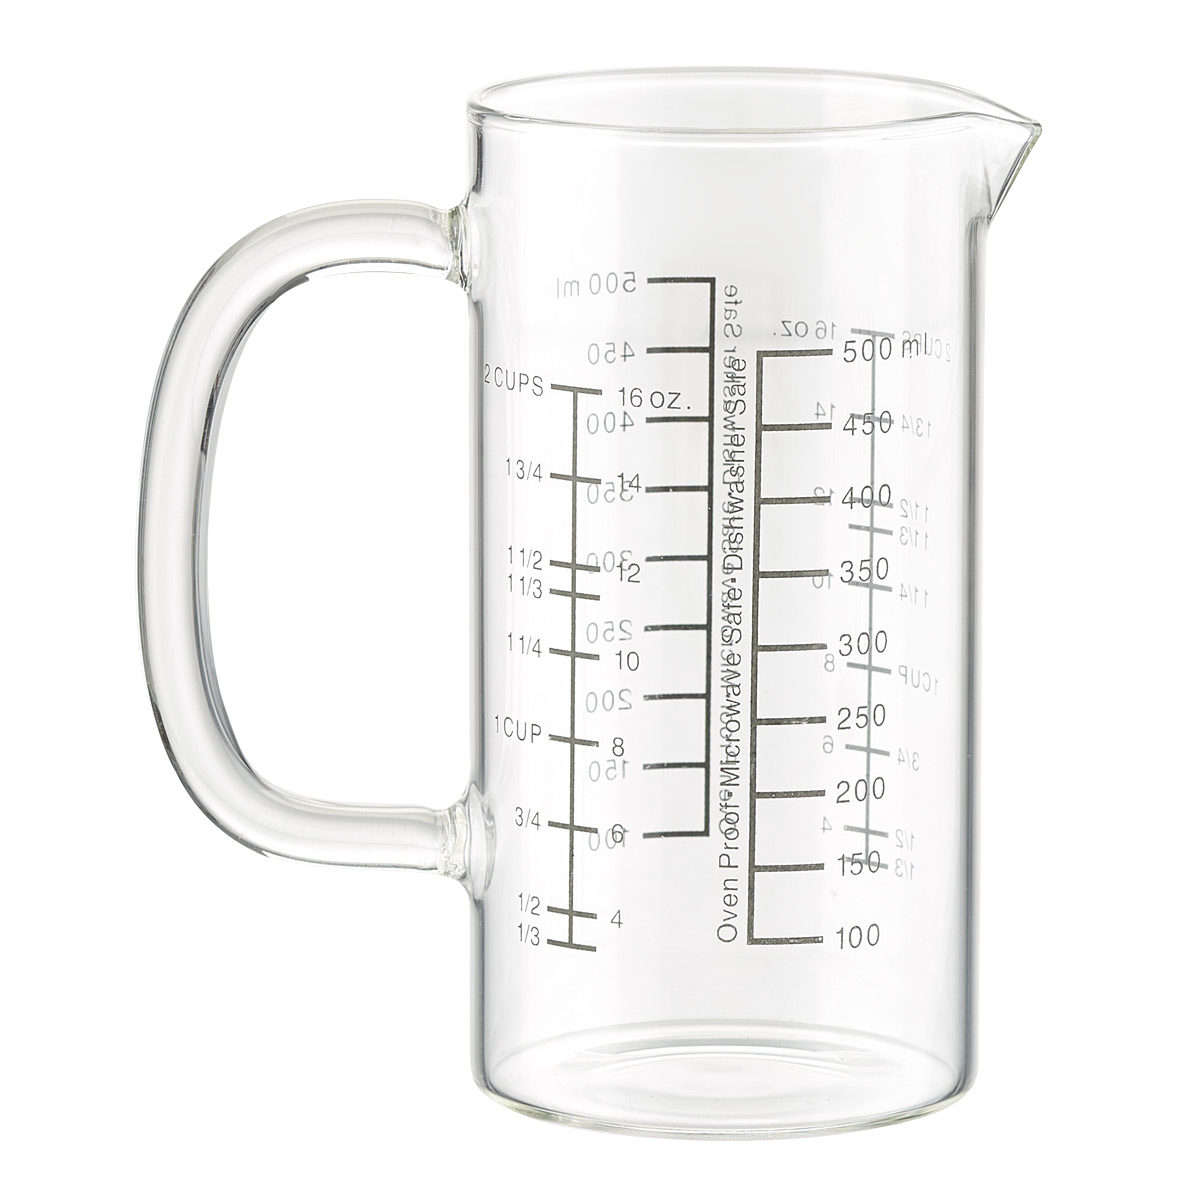 https://www.containerstore.com/catalogimages/379594/10079225-borosilicate-measuring-cup-.jpg